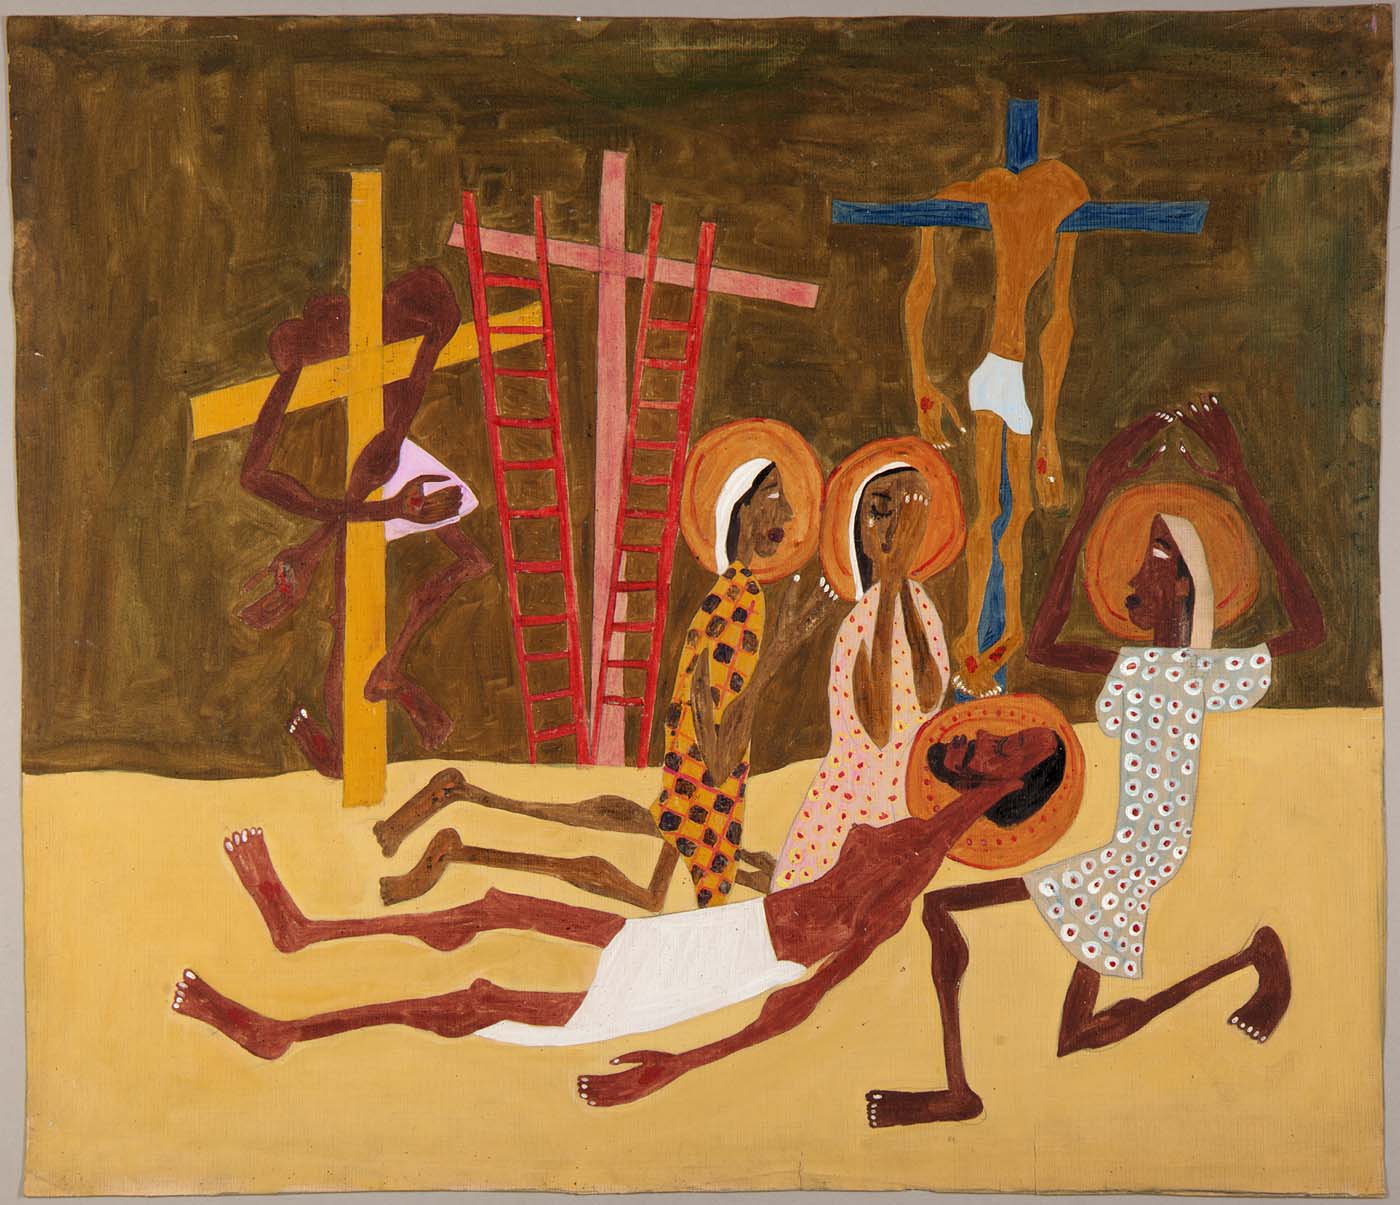 Lamentation, 1944, tempera and pencil on paper 19 1/4 x 22 3/8 in., © William H. Johnson, Smithsonian American Art Museum, Gift of the Harmon Foundation, used with permission.